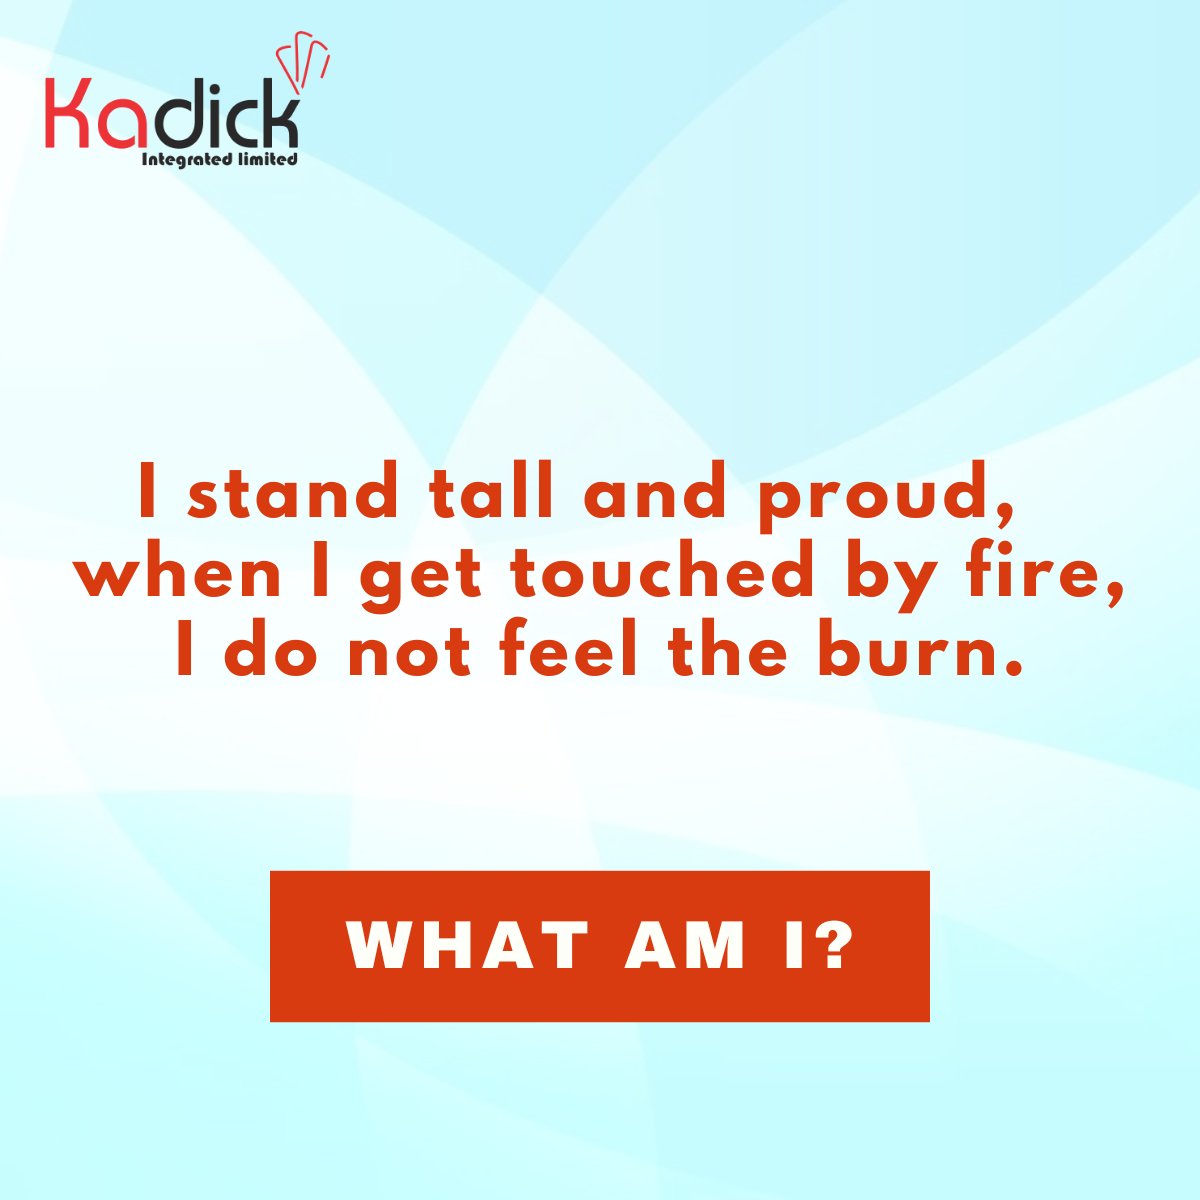 TGIF!!🥳🤩
It's riddle time. Can you solve this riddle?
Drop your answer in the comment section 😍
#tgif #fridayvibes #goodvibes #riddle #riddleoftheday #kadickmoni #kadiick #kadickintegrated